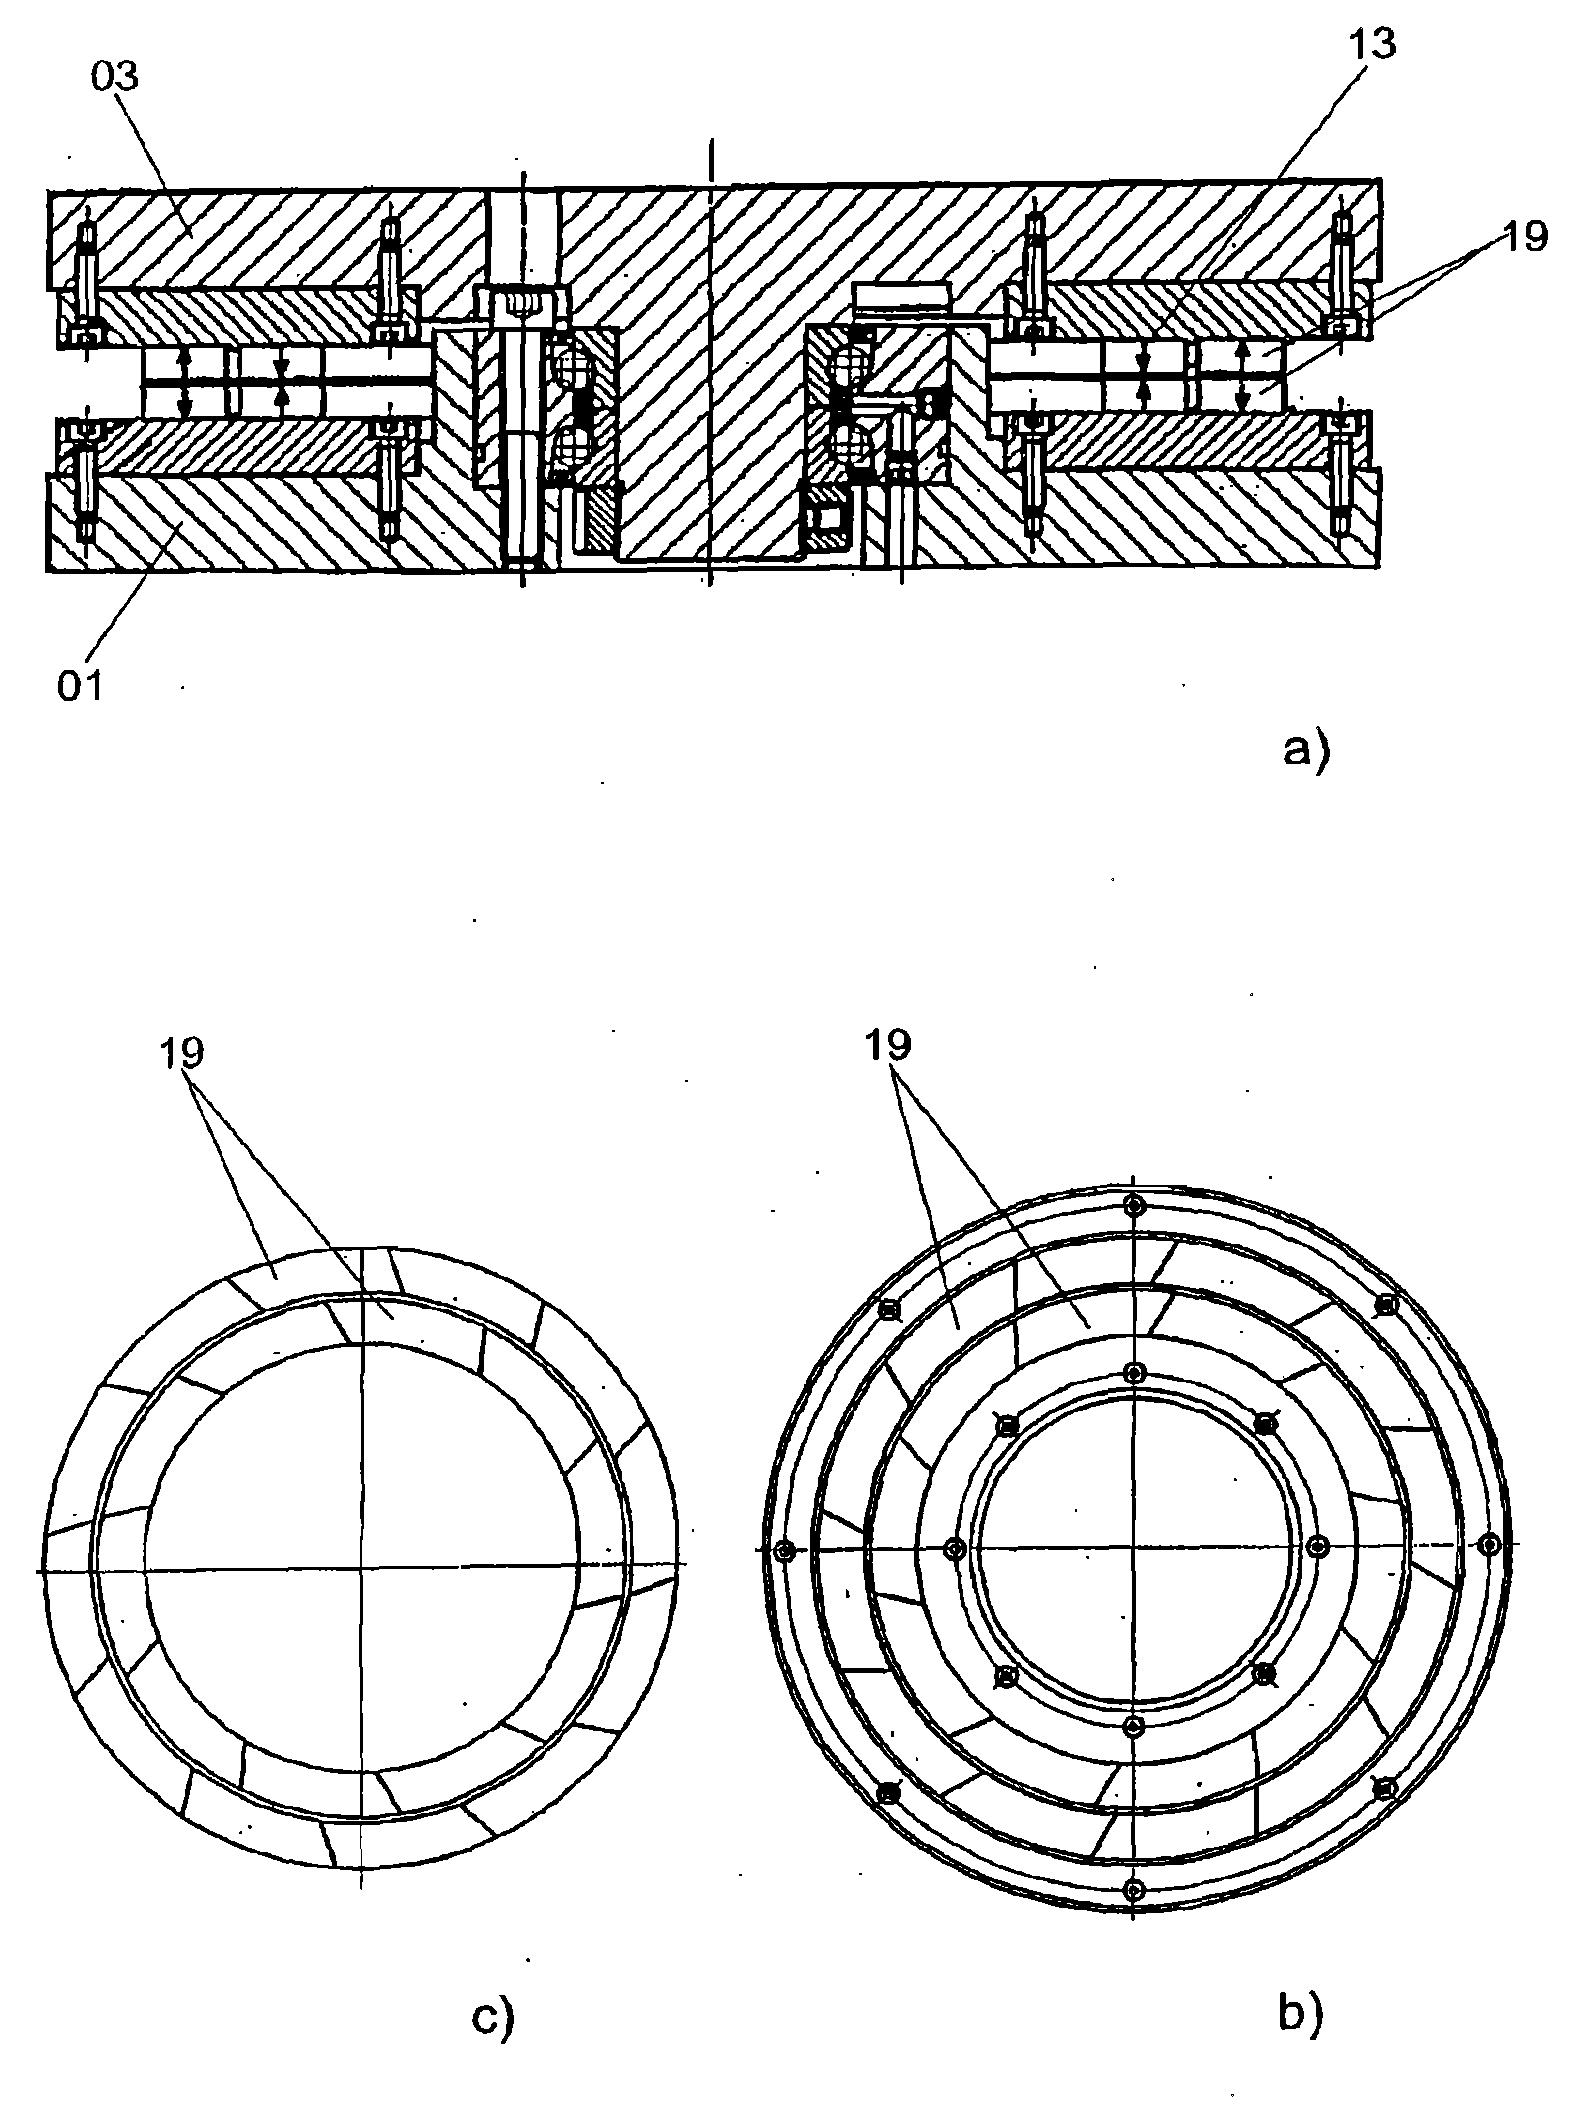 Bearing assembly for machine table with magnetic load relieving mechanism